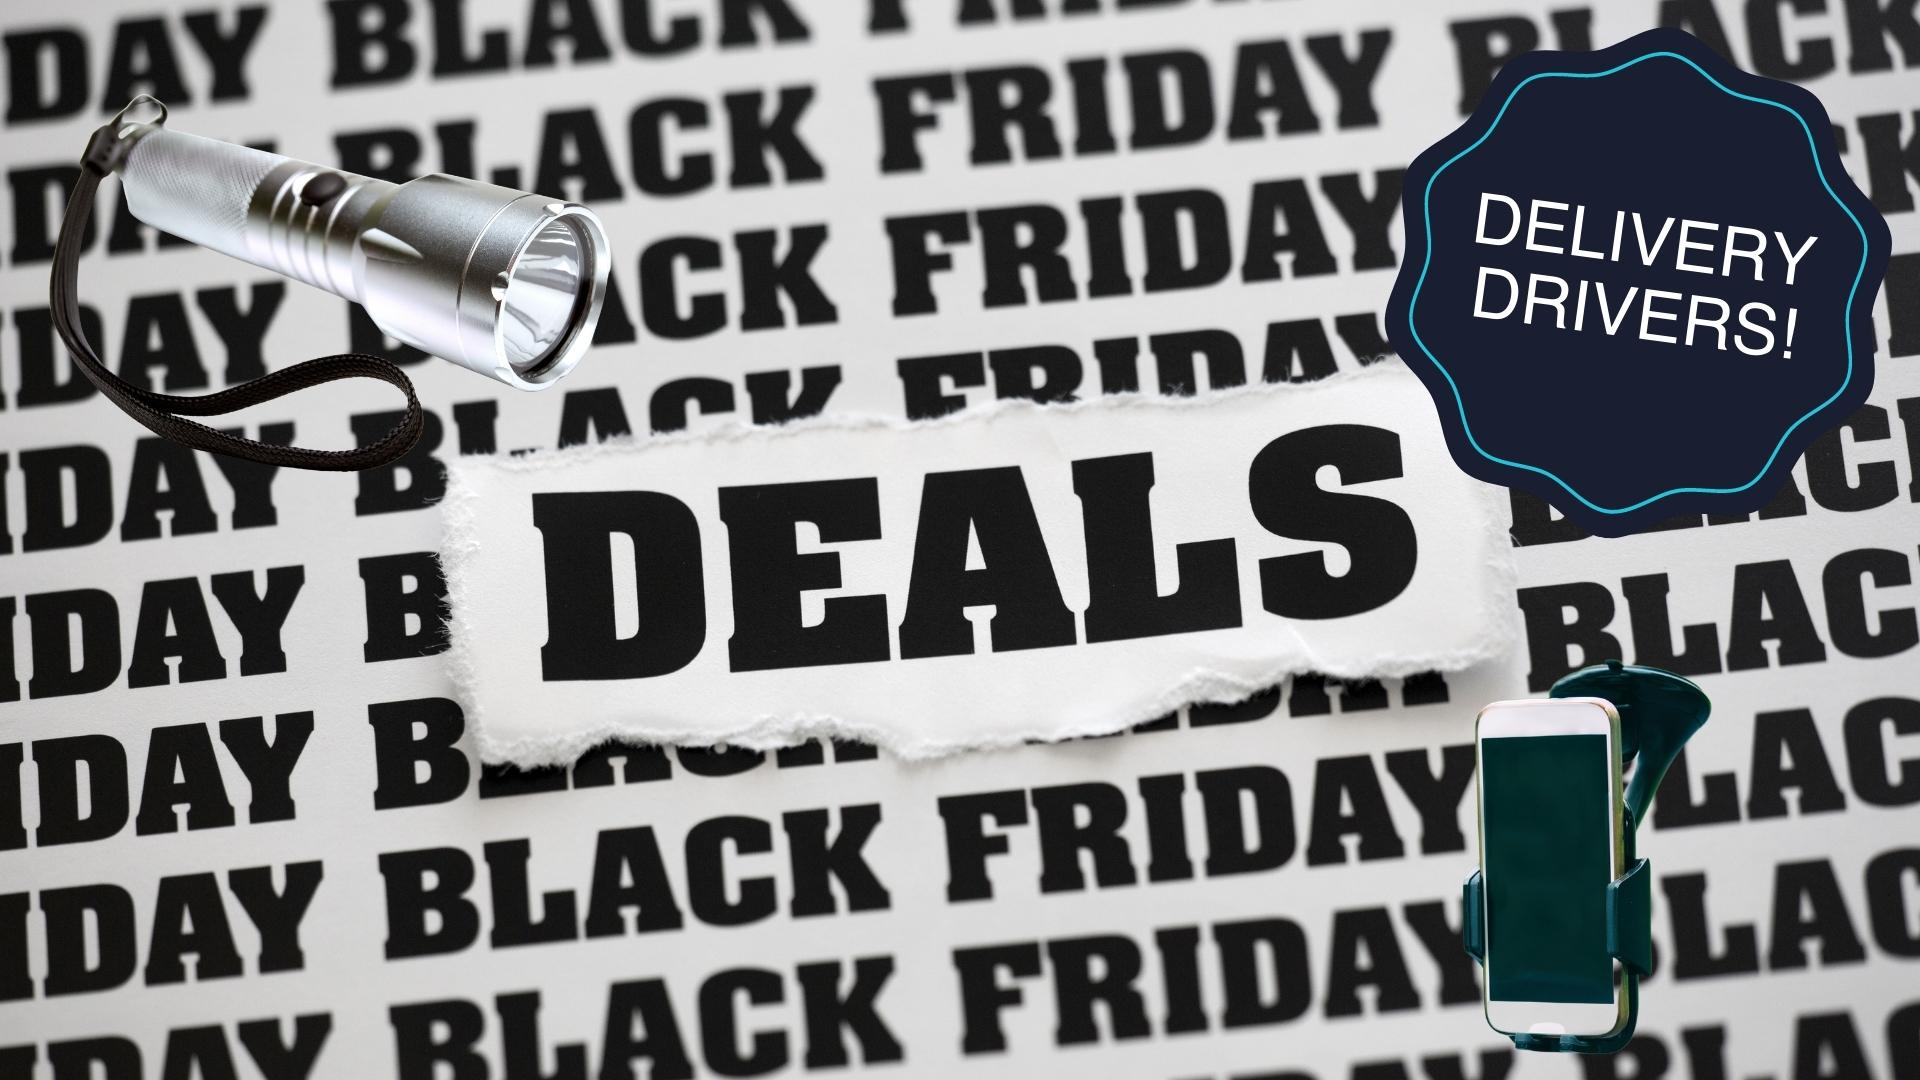 The best Black Friday deals for delivery drivers